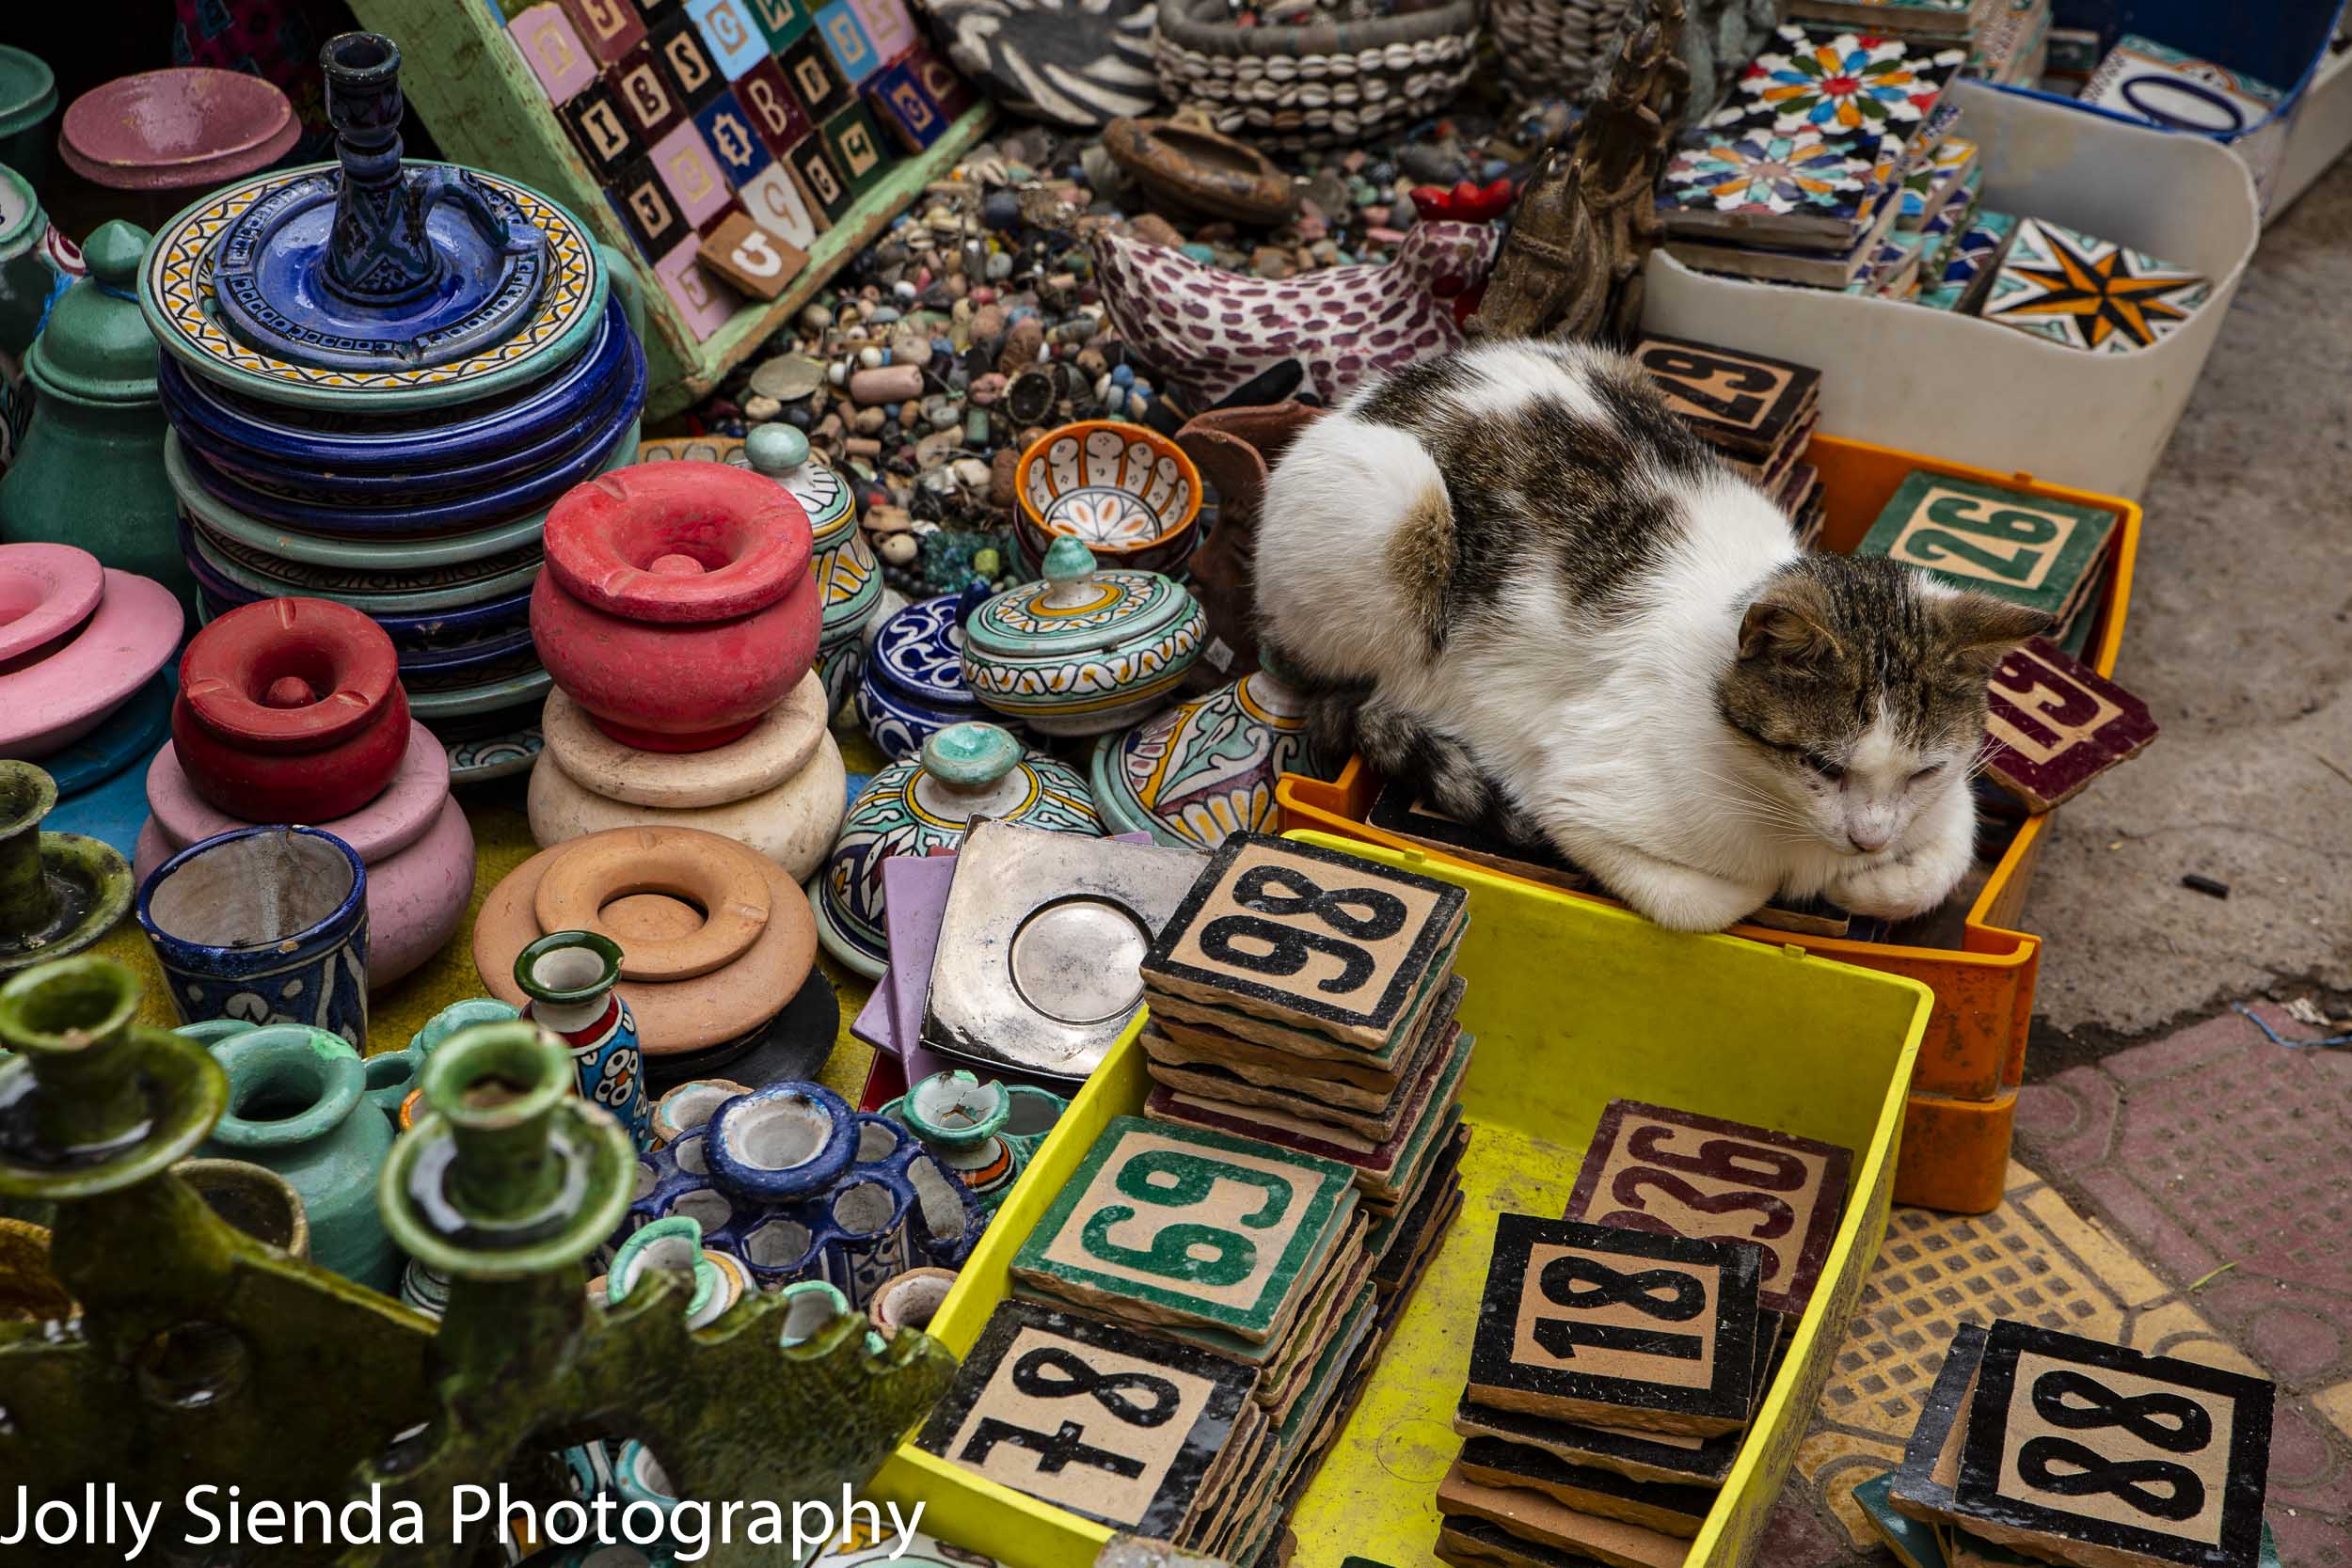 Calico cat sits on ceramic tiles and pottery